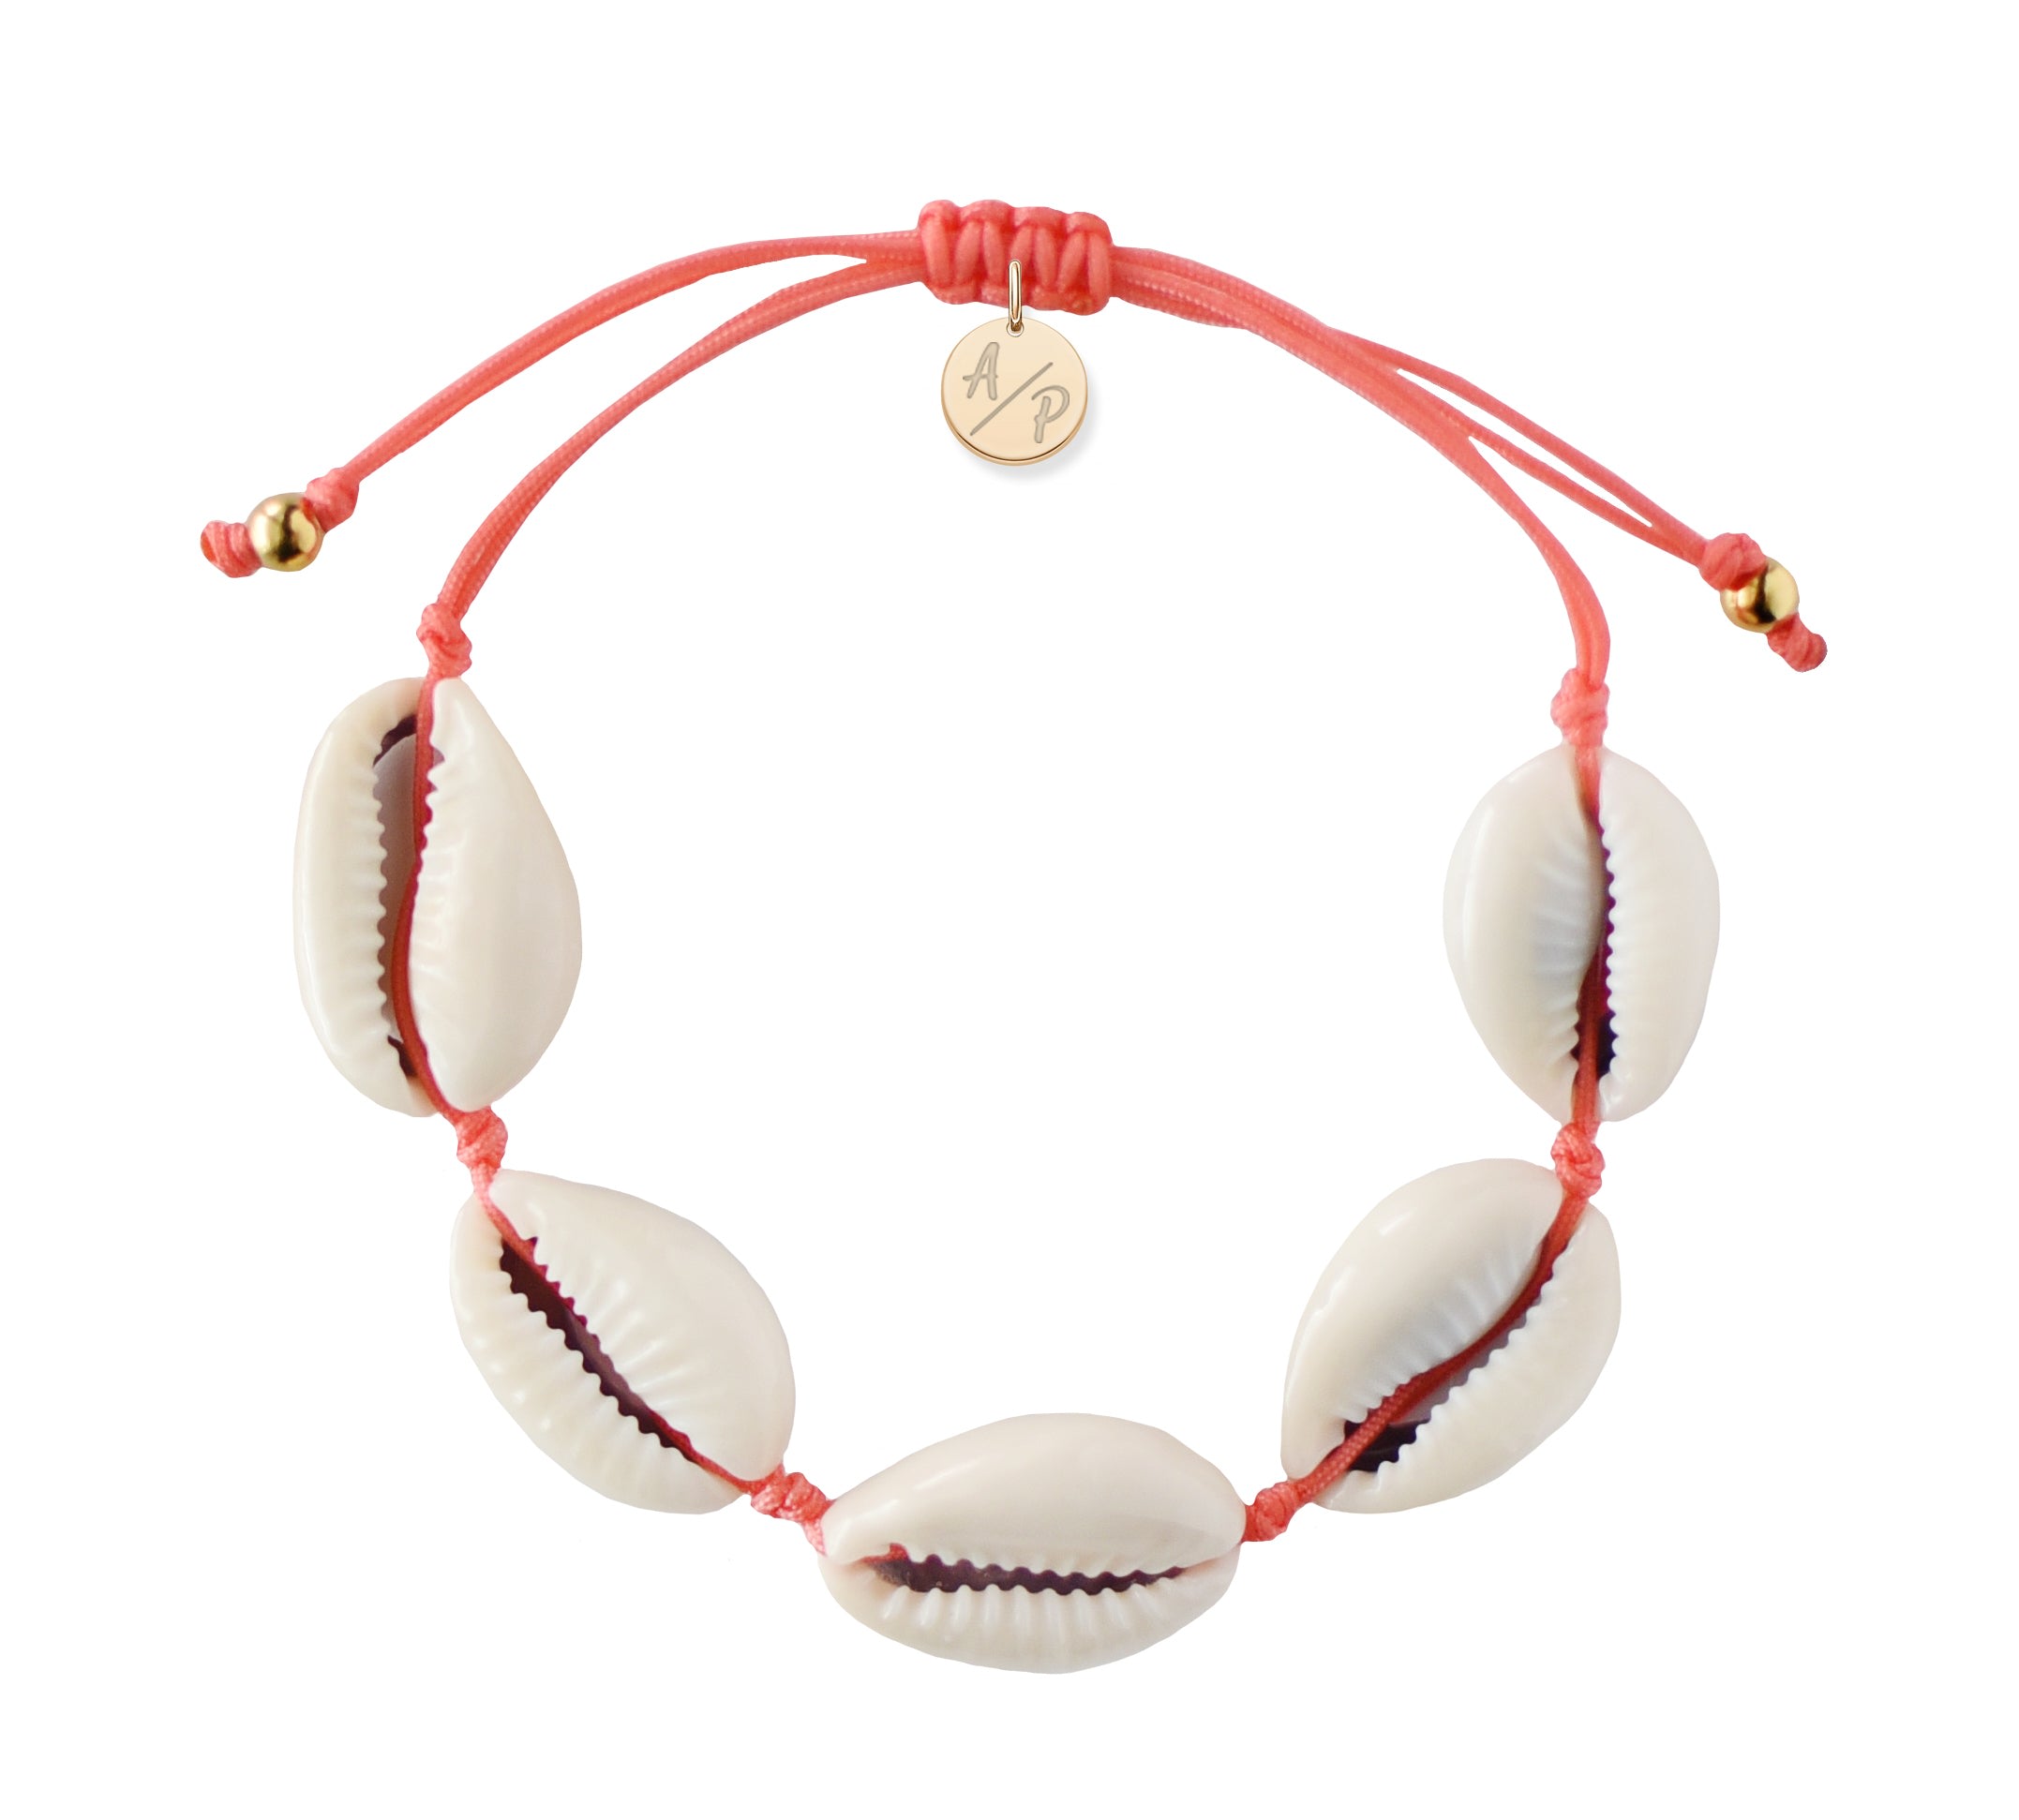 Adriana Pappas Designs Women's Yellow / Orange Natural Shell Adjustable Bracelet On Colored Cord - Coral In Red